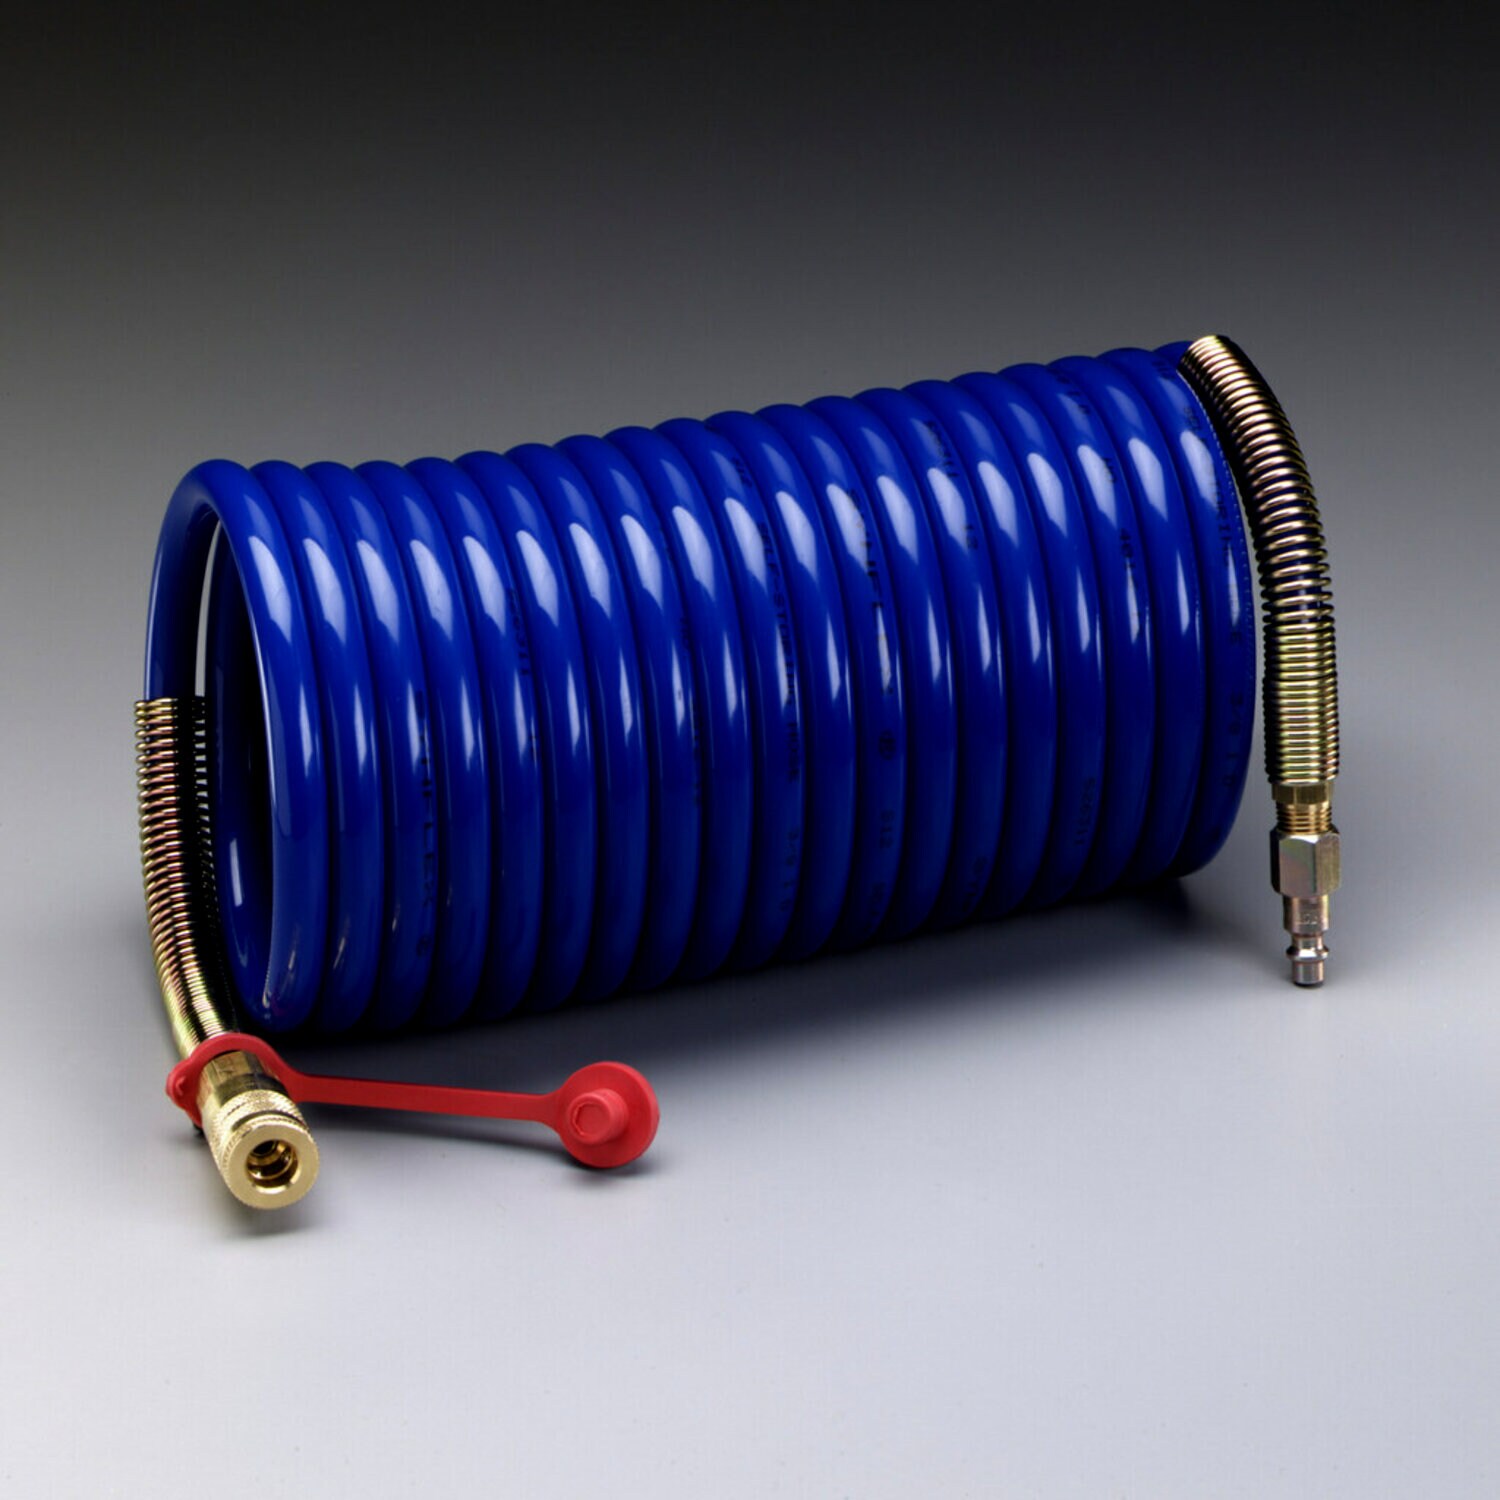 7000031123 - 3M Supplied Air Hose W-2929-100, 100 ft, 3/8 in ID, Industrial
Interchange Fittings, High Pressure, Coiled 1 EA/Case